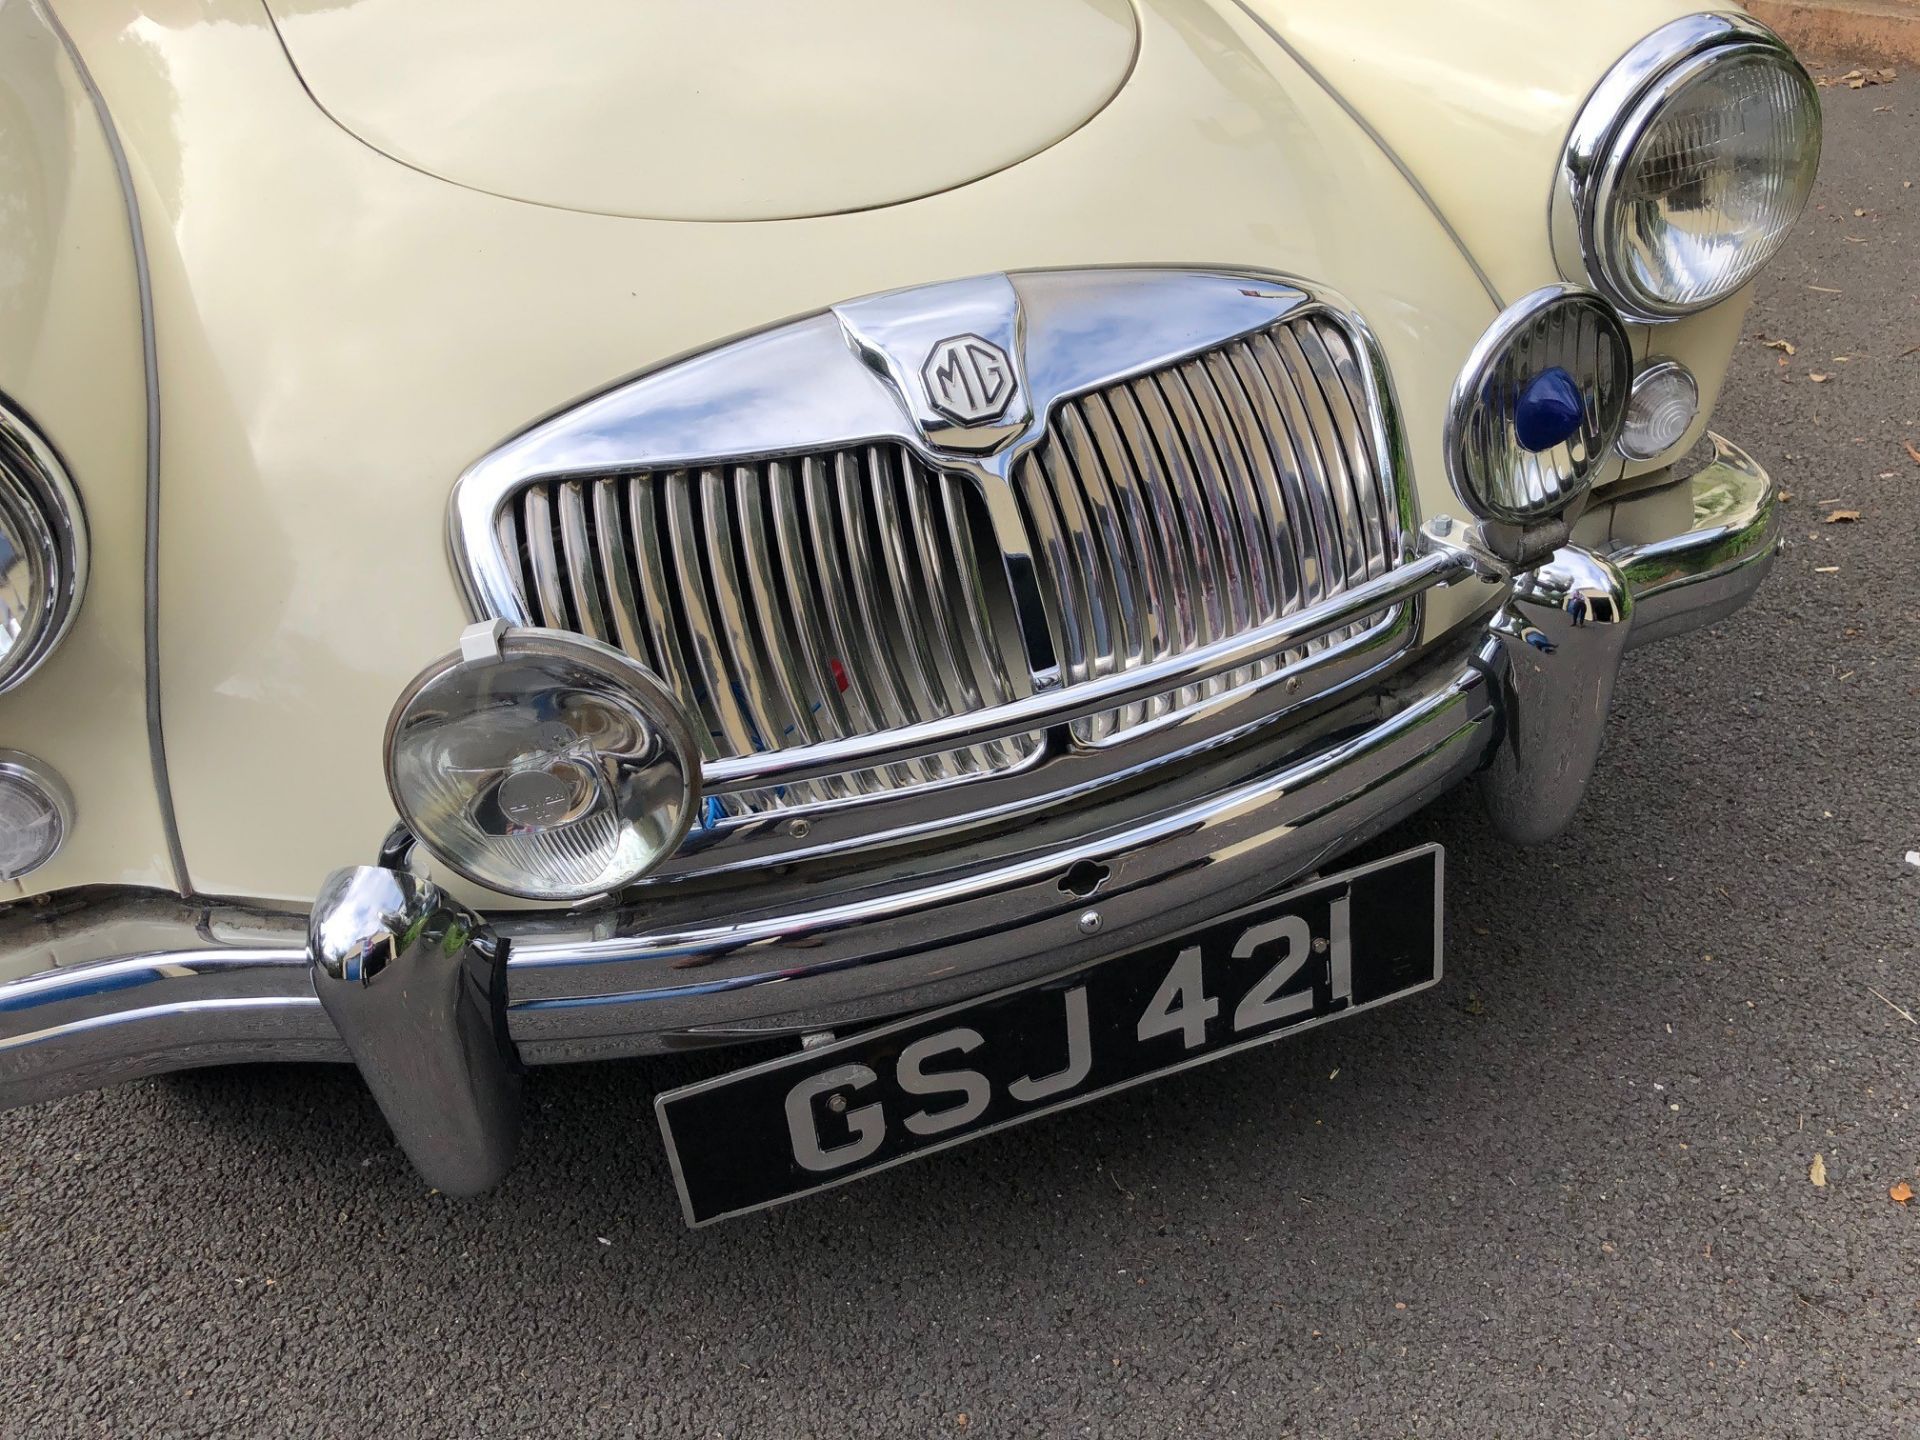 ***Regretfully Withdrawn*** 1959 MG A Roadster 1500 Registration number GSJ 421 Chassis number HDR - Image 10 of 59